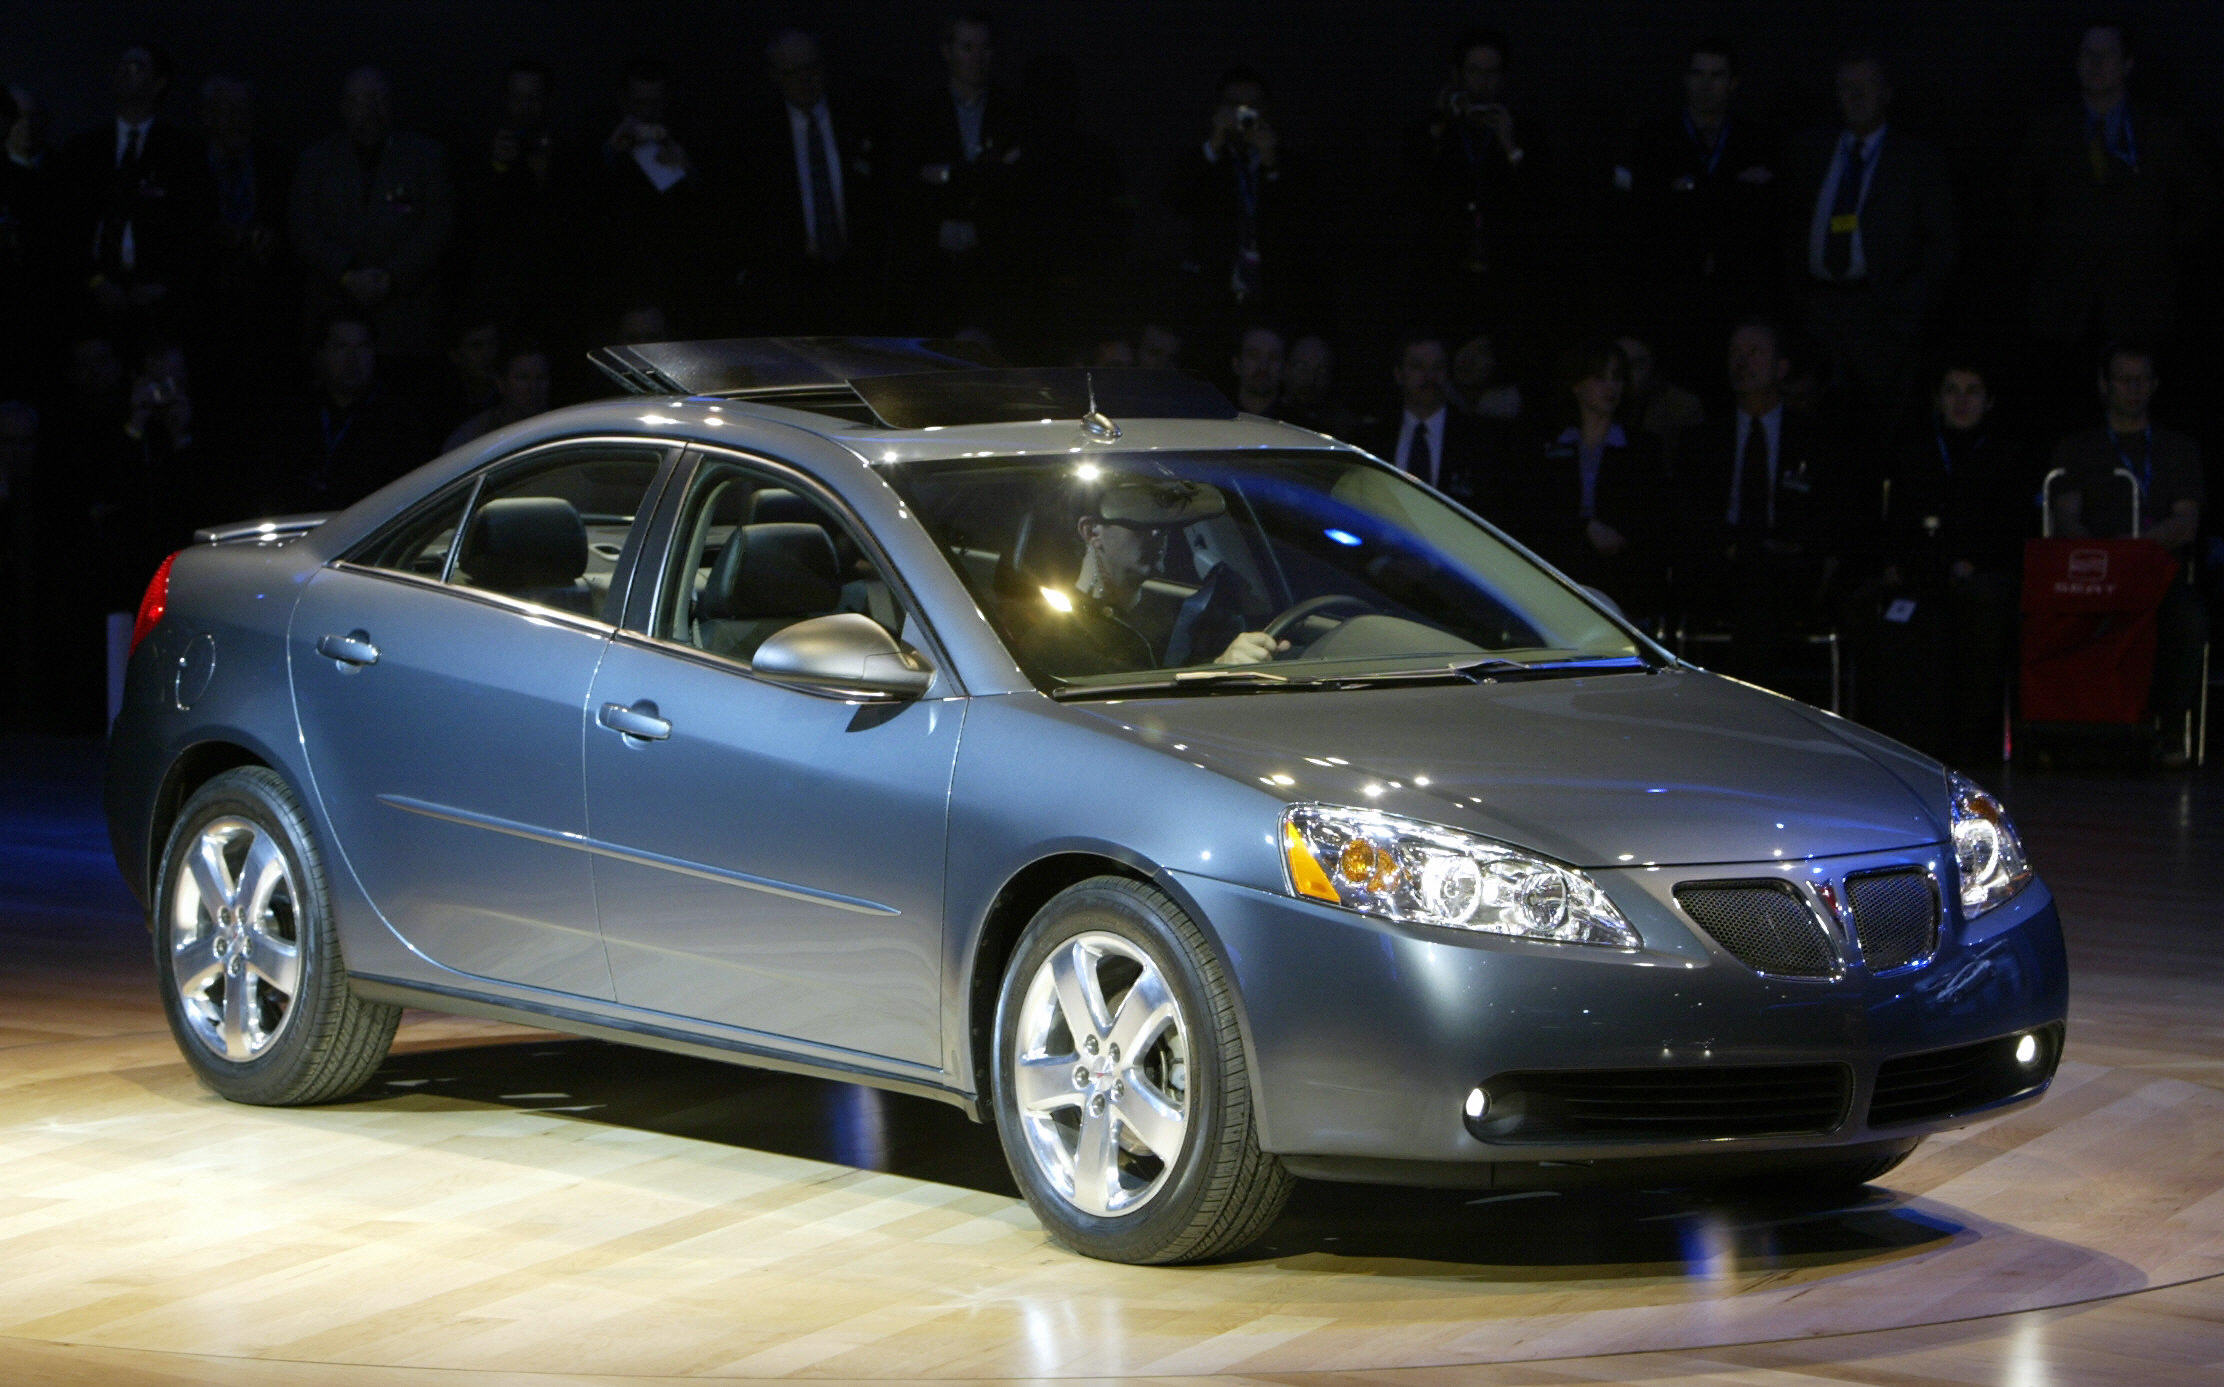 The 2005 Pontiac G6 was shown in 2004 at the North American International Auto Show at Cobo Hall in Detroit, Michigan